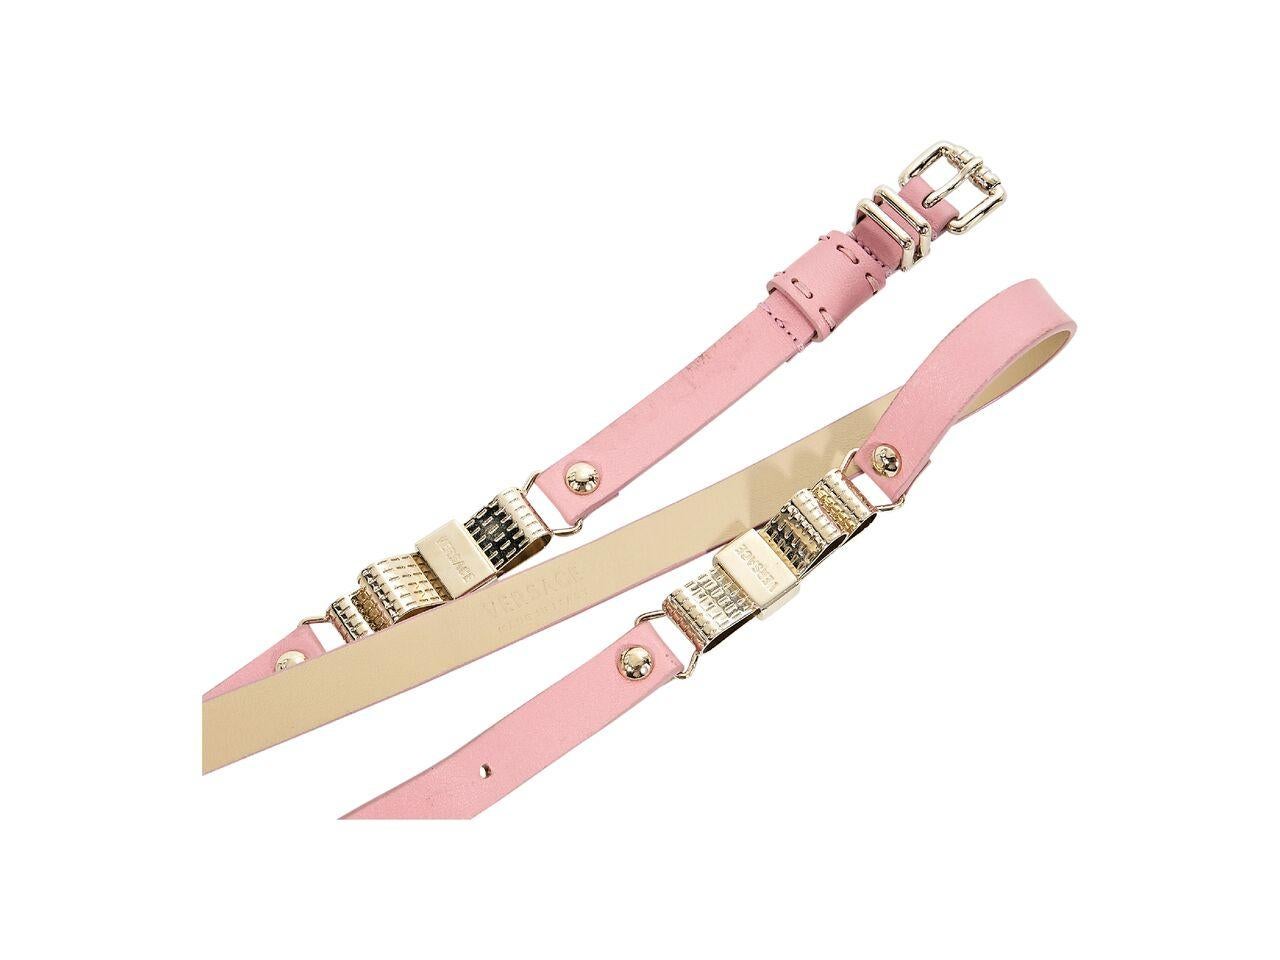 Product details:  Light pink skinny leather belt by Versace.  Accented with two bow charms.  Adjustable buckle closure.  Goldtone hardware.  36.5